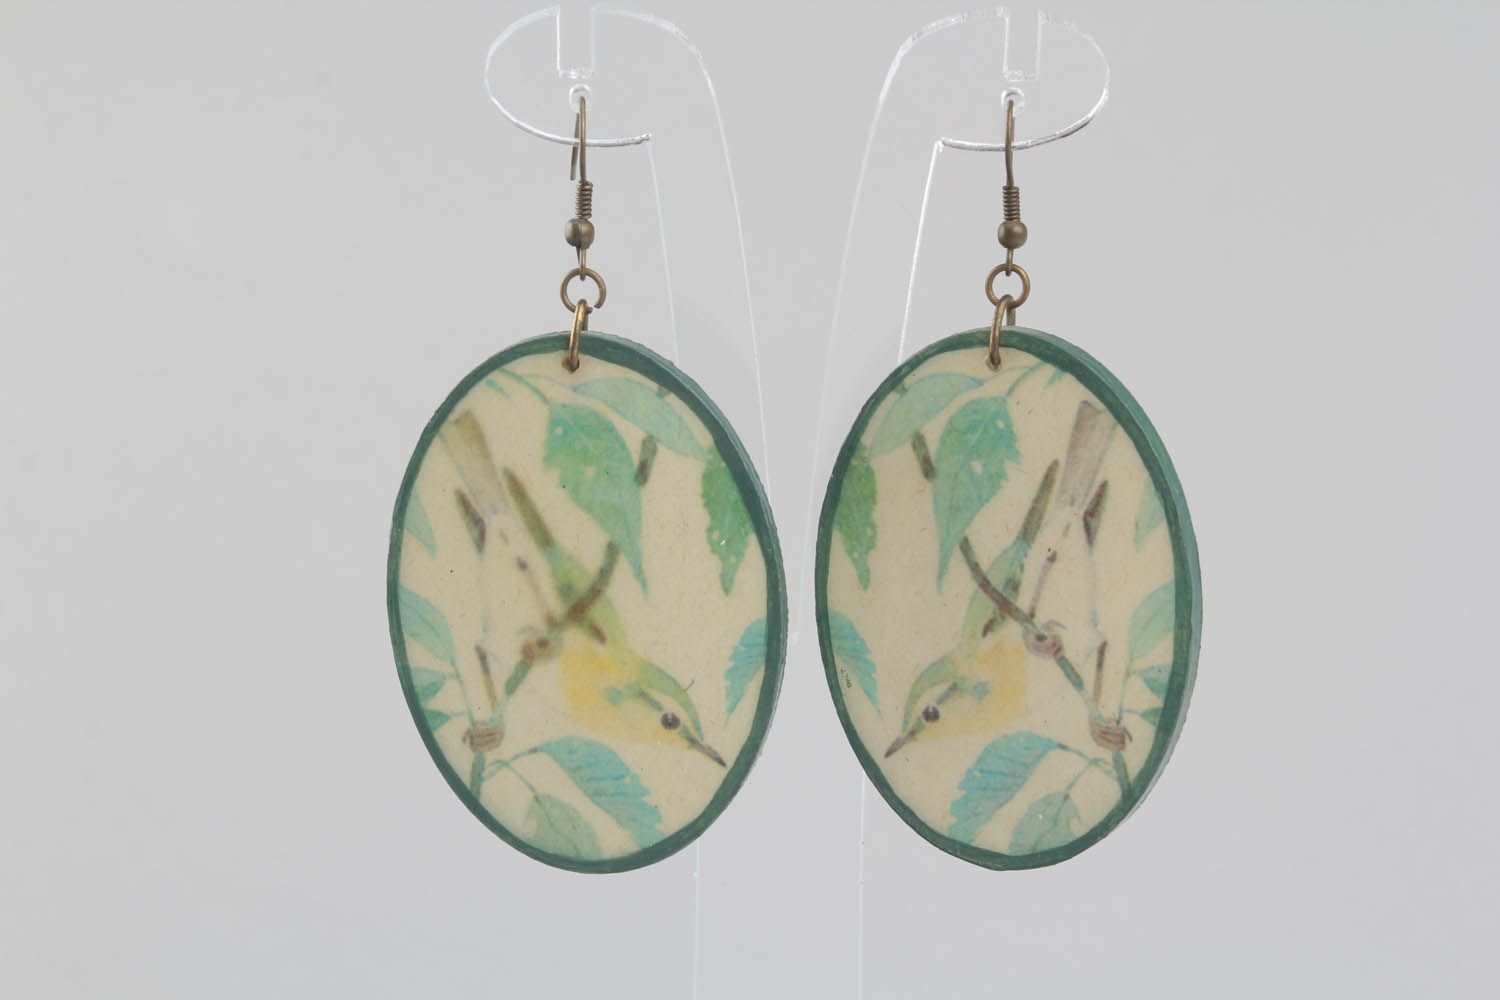 Earrings made using decoupage technique photo 4